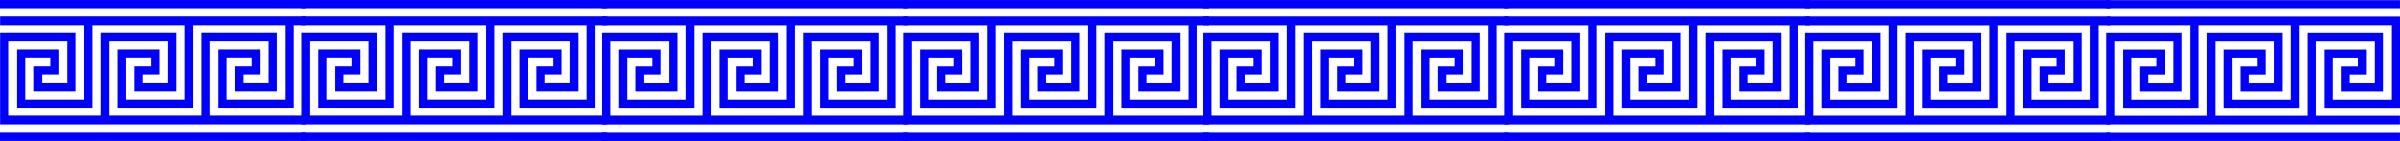 Blue Greek Key With Lines Border PNG icons